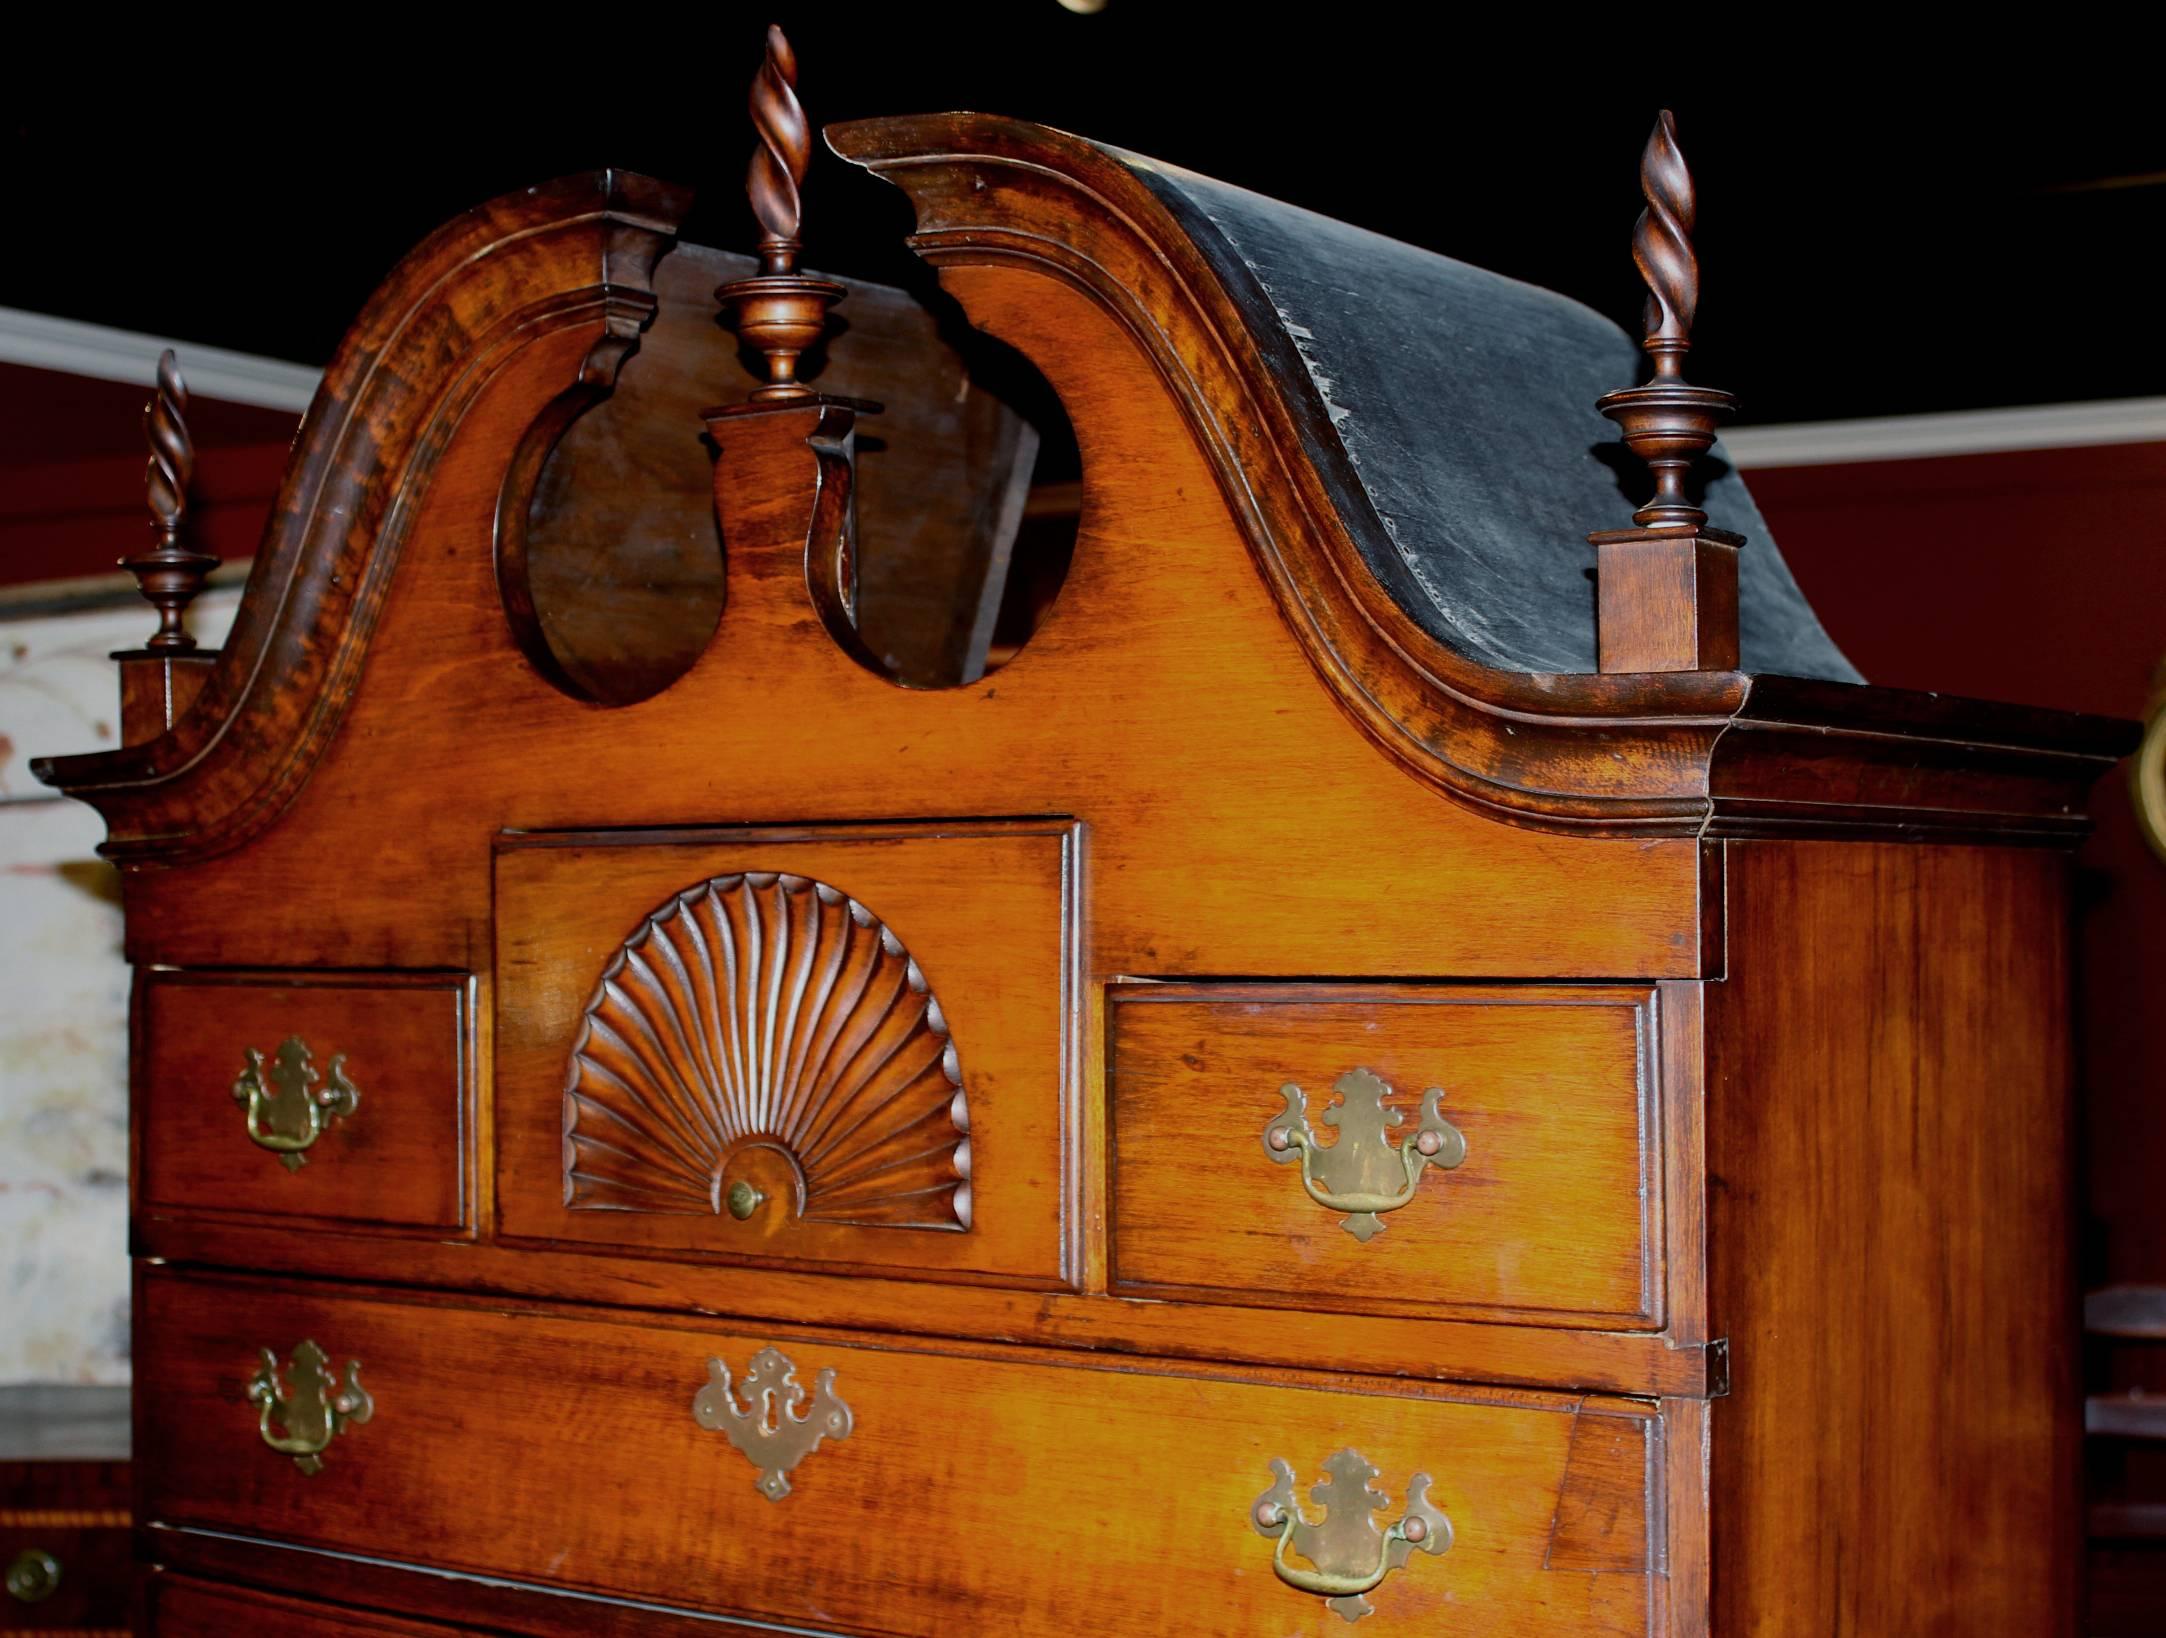 A splendid 18th century Queen Anne two part maple bonnet top highboy with bonnet top, flame finials, an upper case with three fitted small drawers over three graduated long drawers, the central upper fitted drawer with a radiating fan carving, over